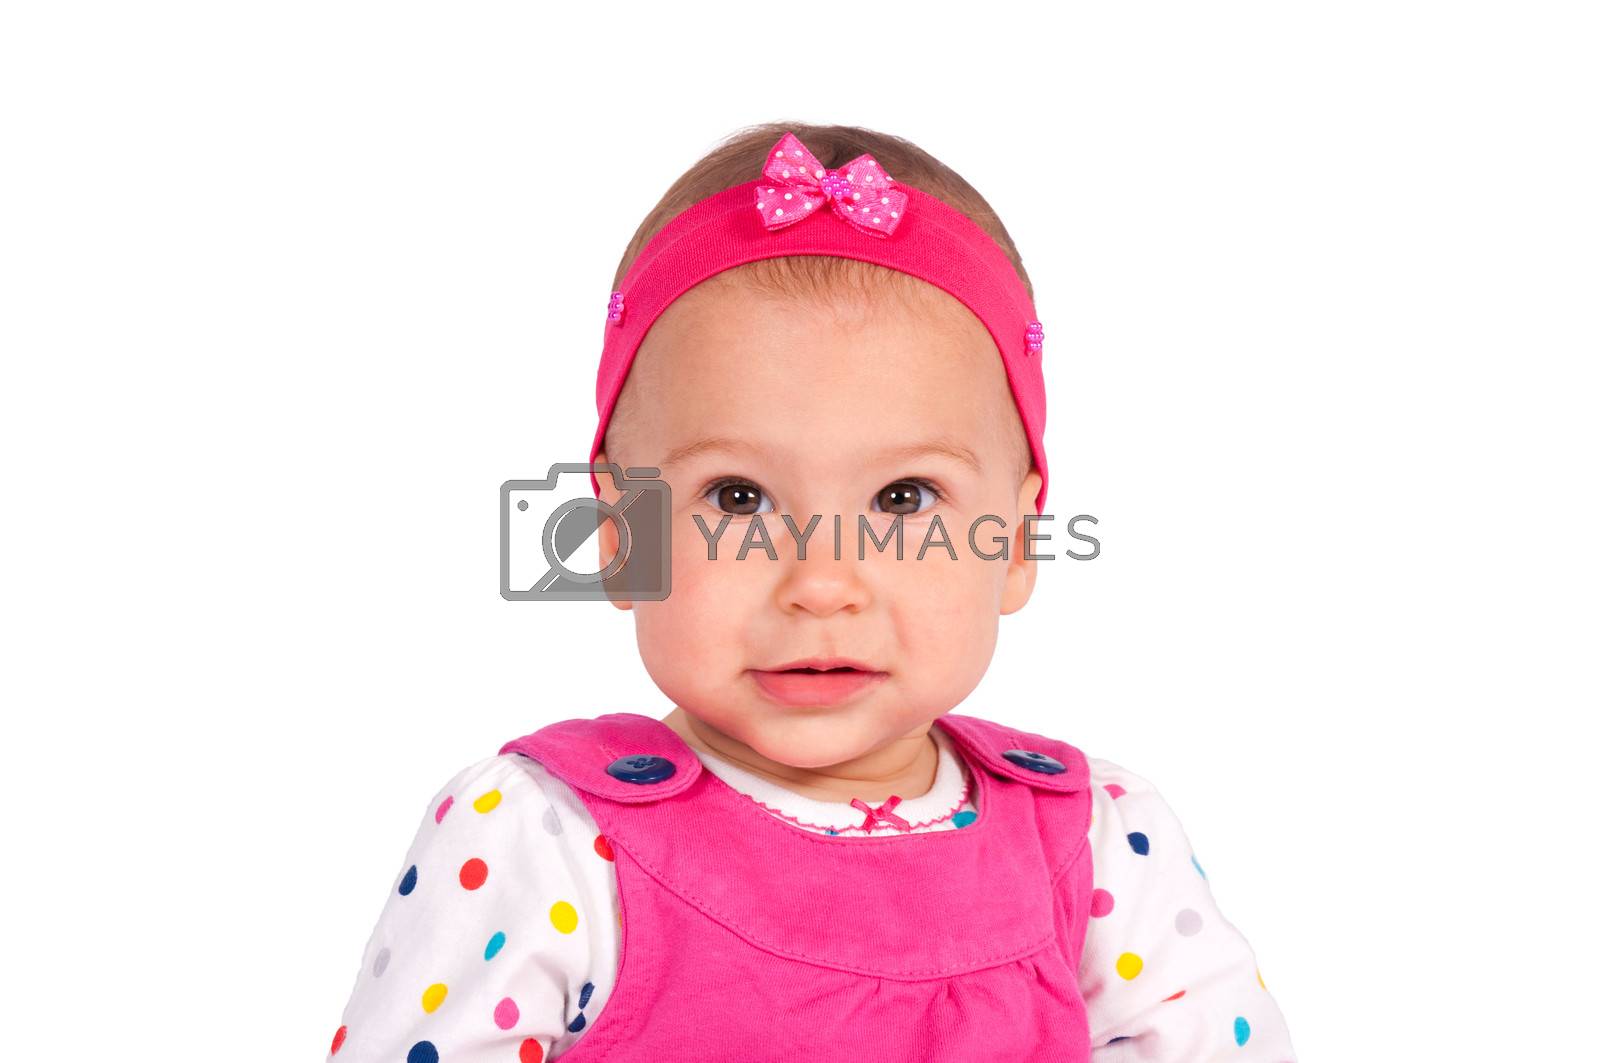 Royalty free image of Little daughter by badmanproduction